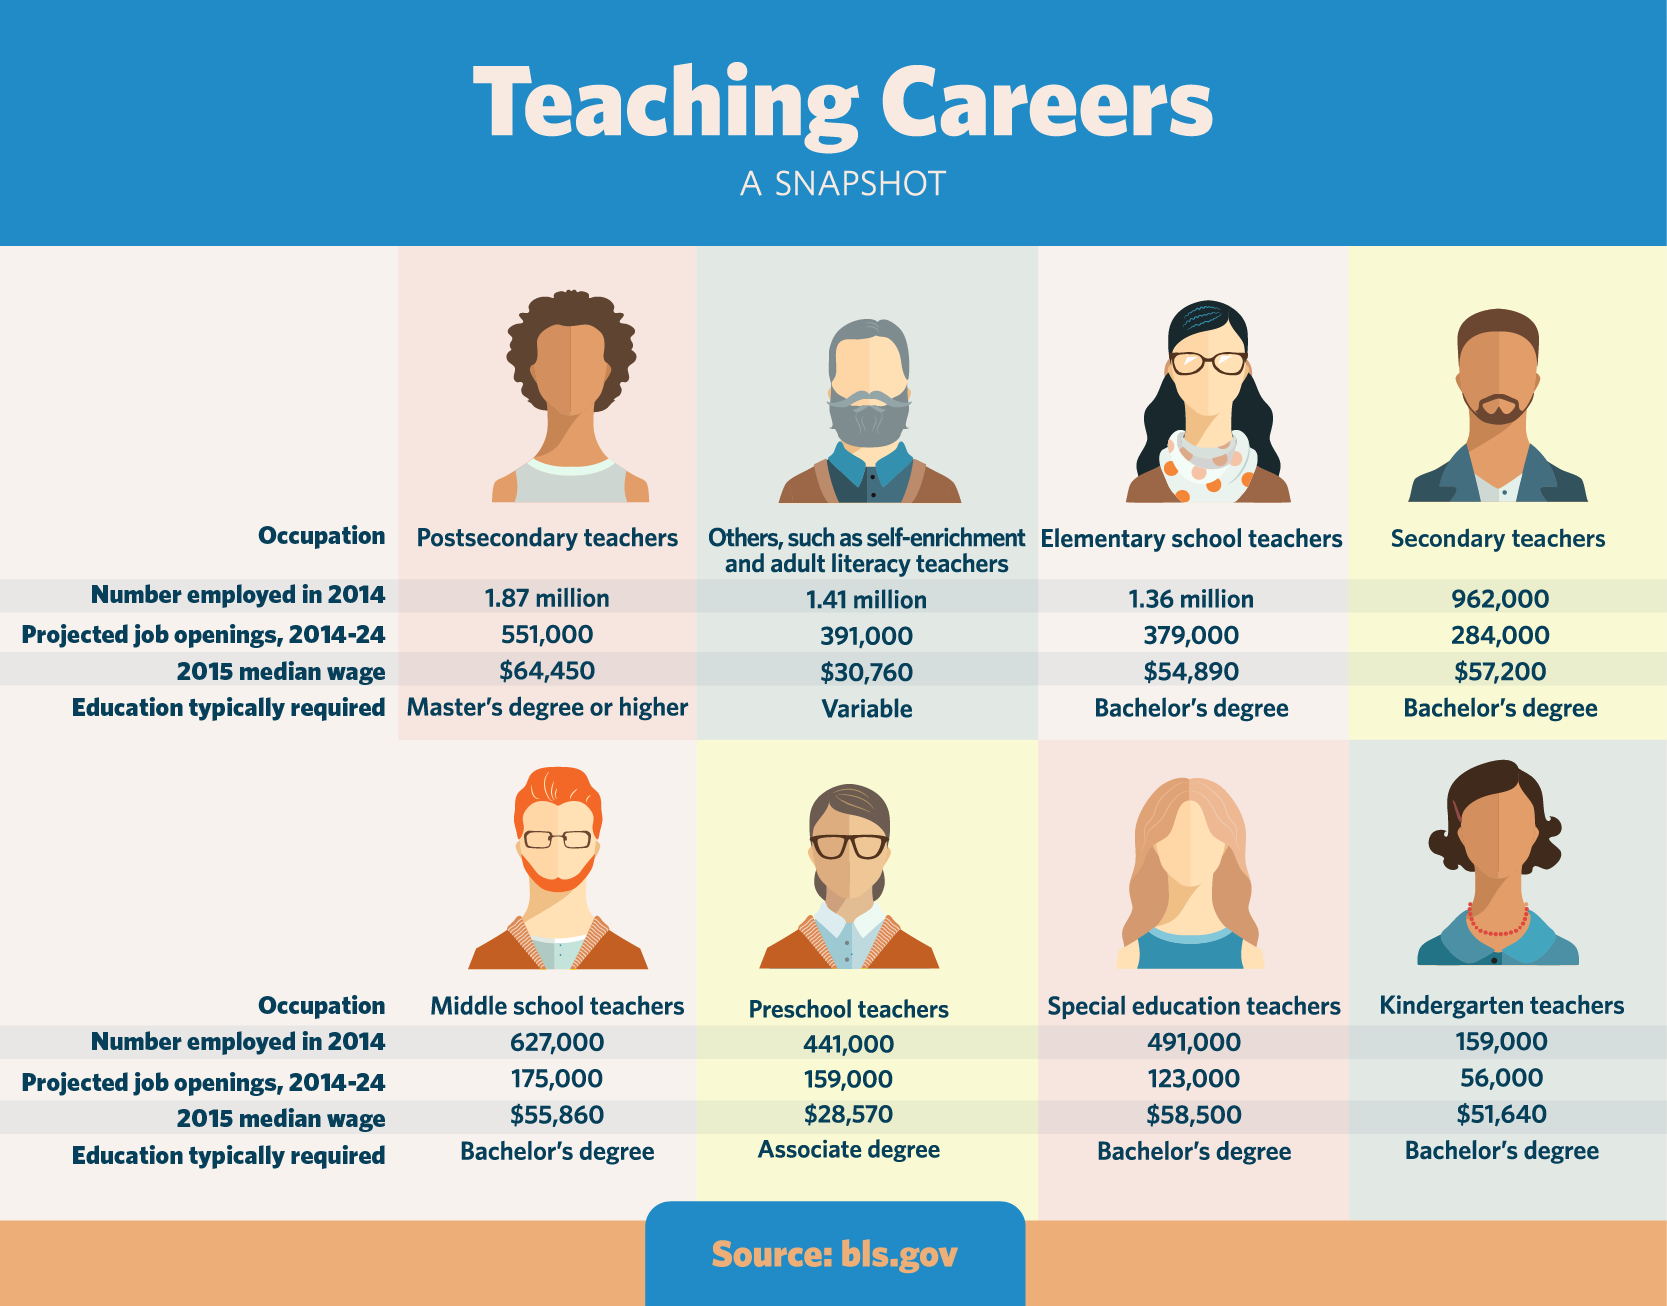 A graphic showing employment and wages for different types of teaching careers, including preschool, K-12, postsecondary, and special education.